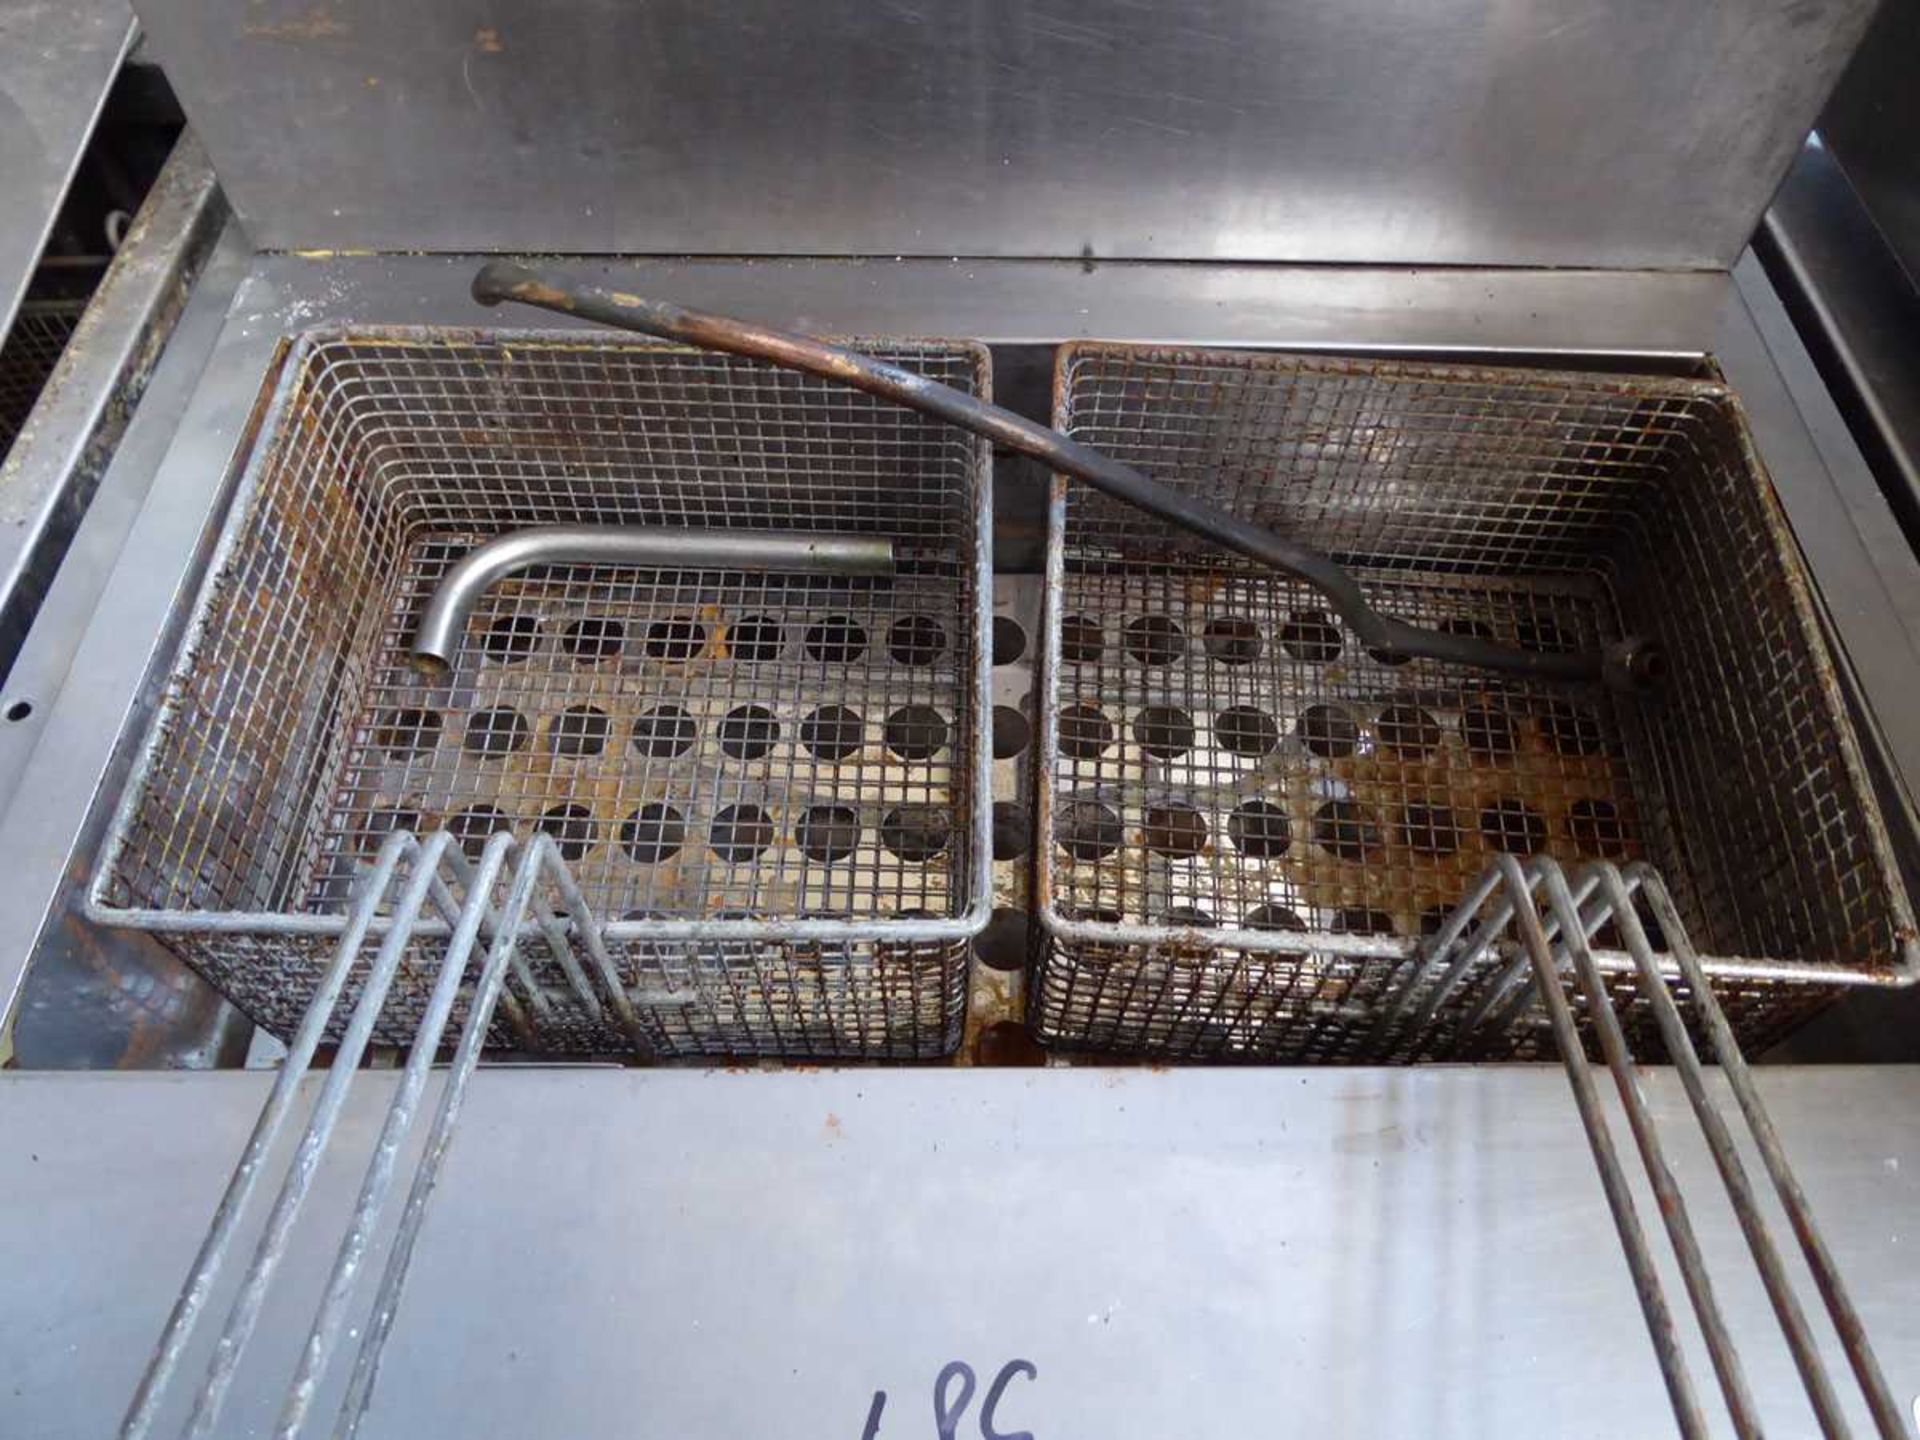 52cm LPG Parry single tank fryer with 2 baskets - Image 2 of 2